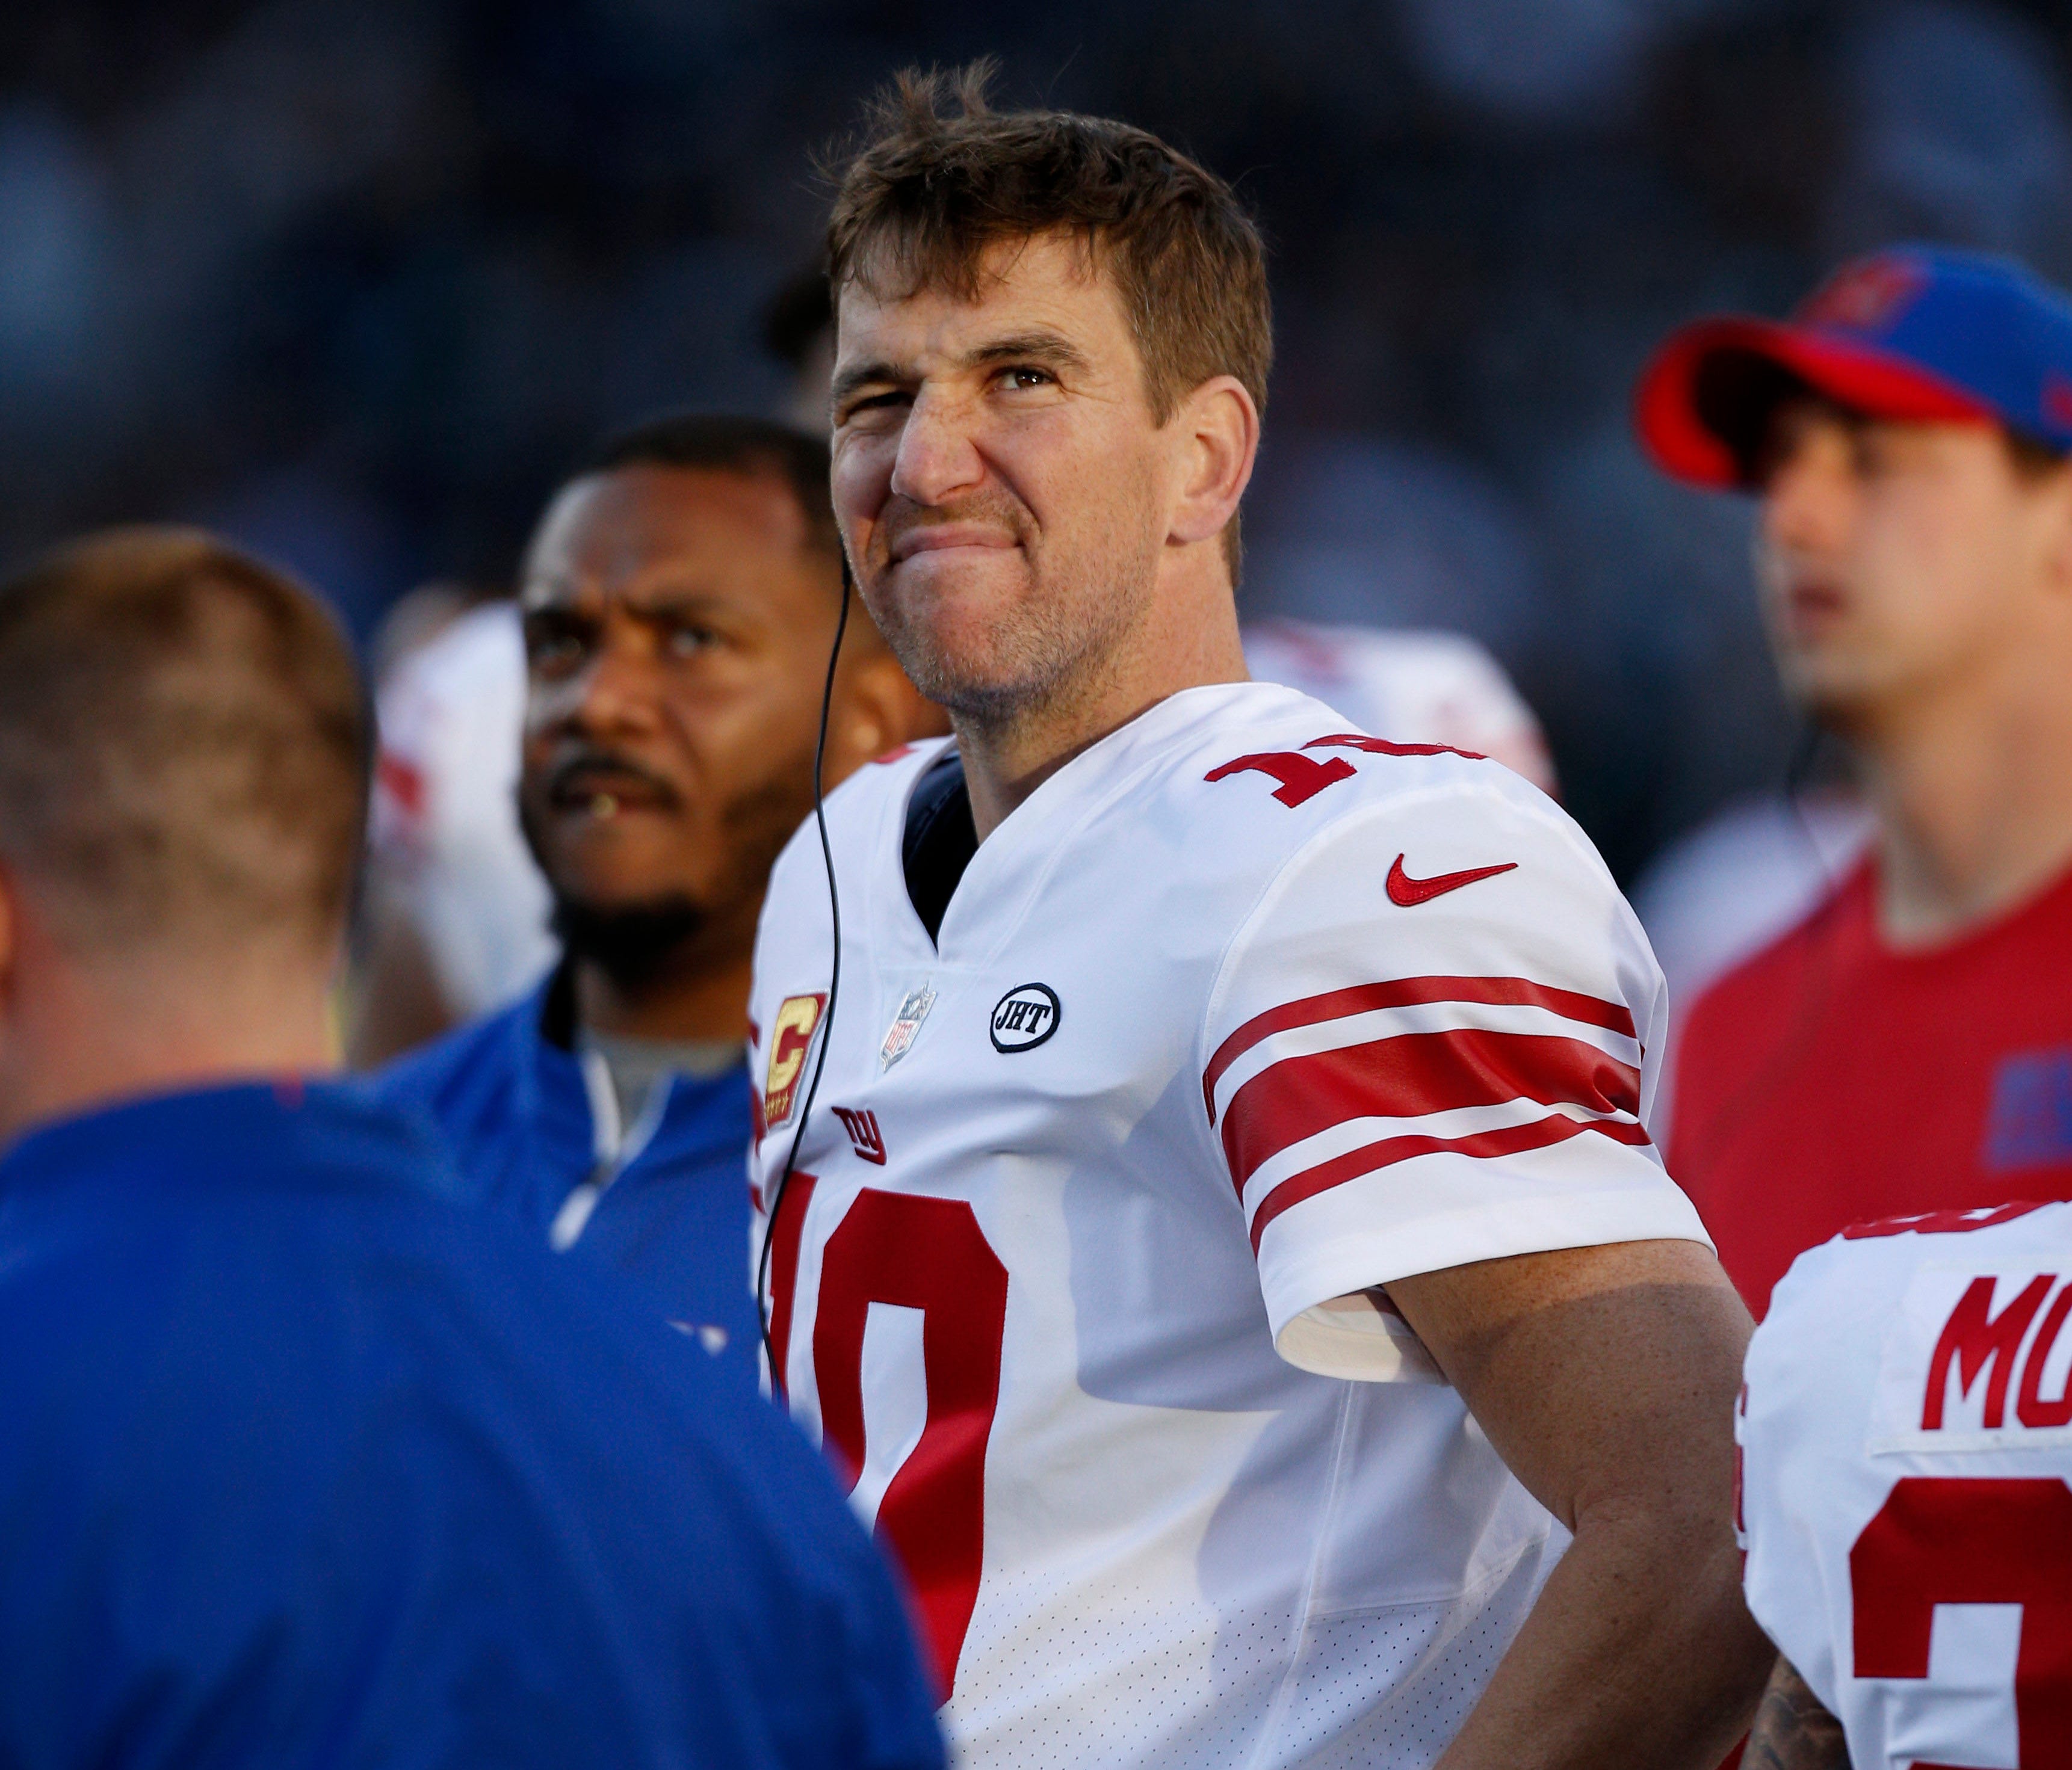 Eli Manning's benching resulted in the dismissal of GM Jerry Reese and coach Ben McAdoo by the Giants.